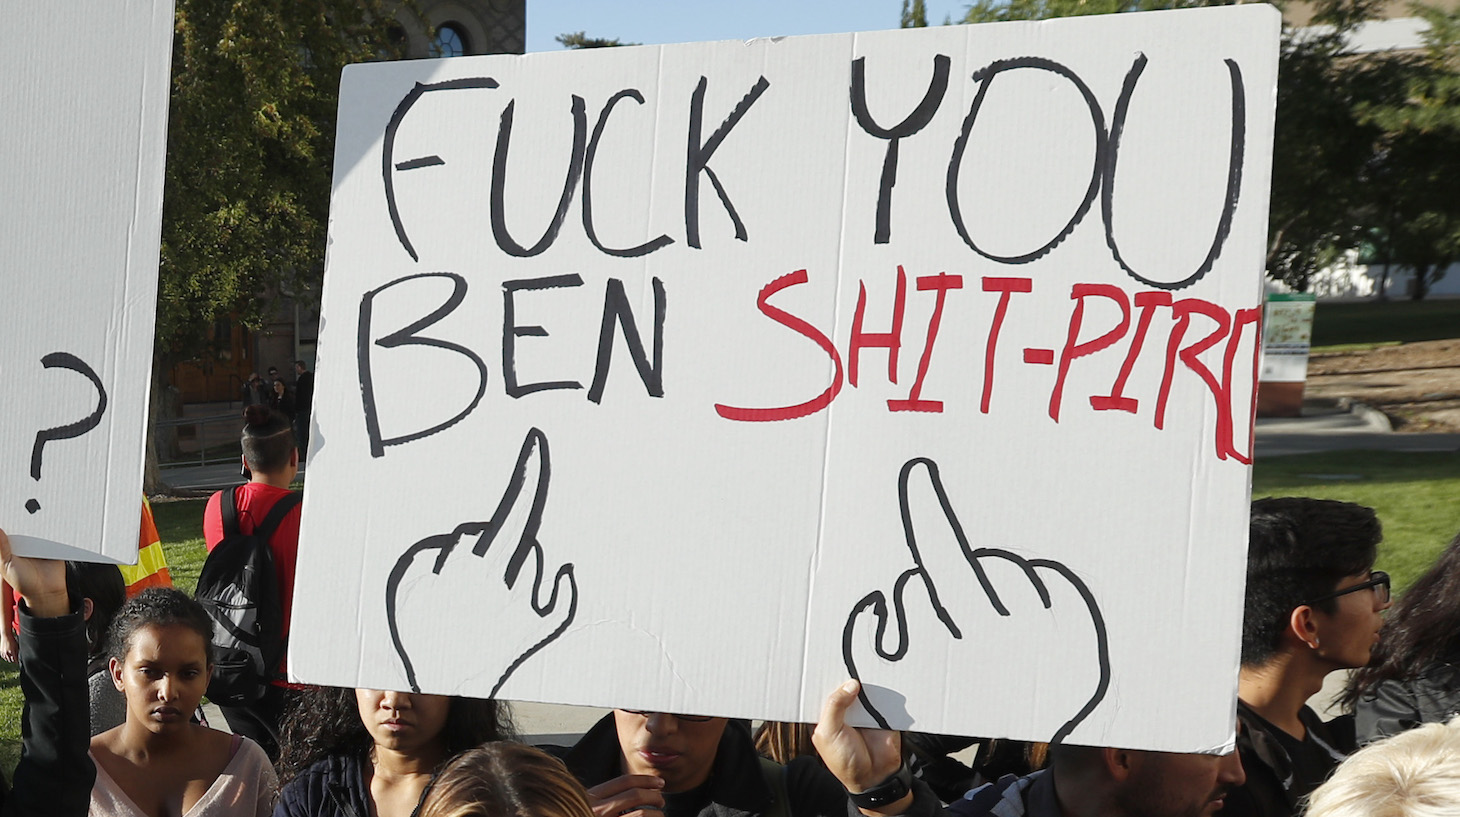 Protesters from Students For a Democratic Society demonstrate on the University of Utah campus against an event where right wing writer and commentator Ben Shapiro is speaking on September 27, 2017 in Salt Lake City, Utah. Campus authorities have increased security ahead of the appearance by Shapiro, a former editor-at-large for Breitbart News. Around 500 people marched across campus, chanting and giving speeches.